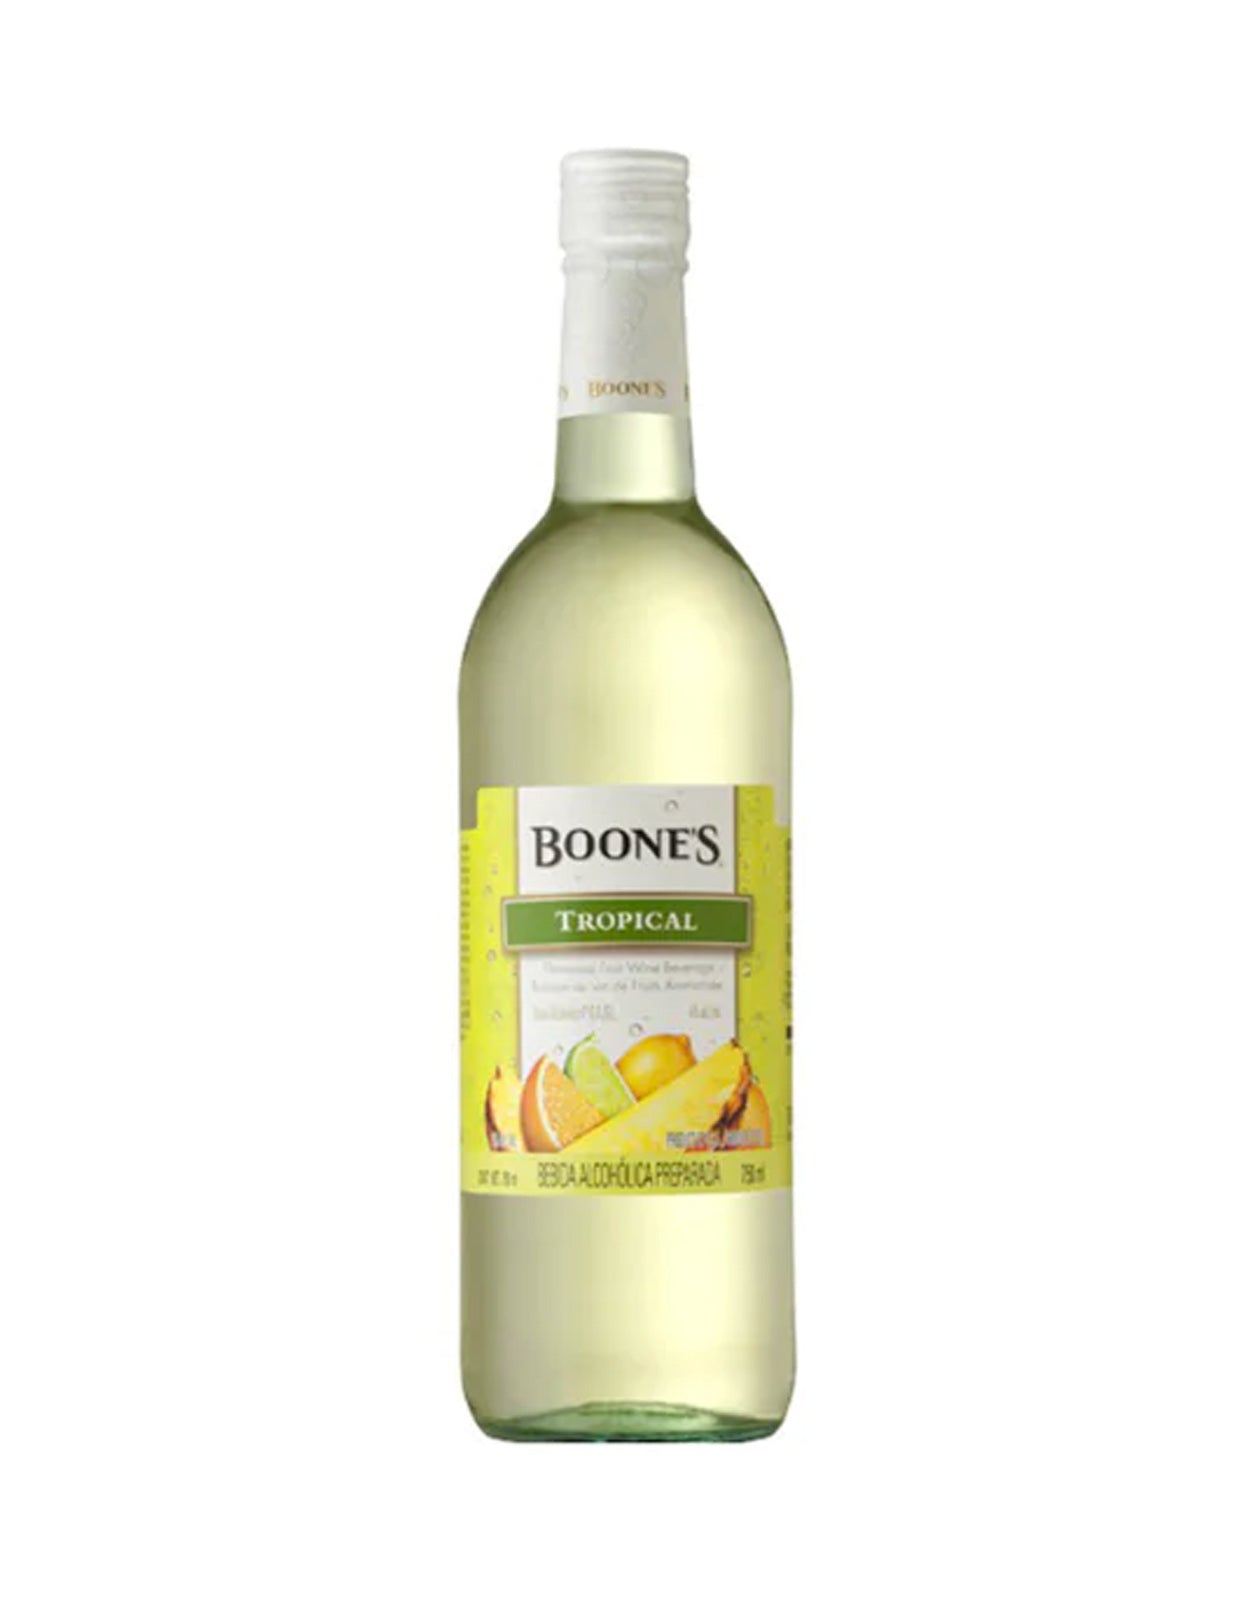 Boone's Tropical - 12 Bottles